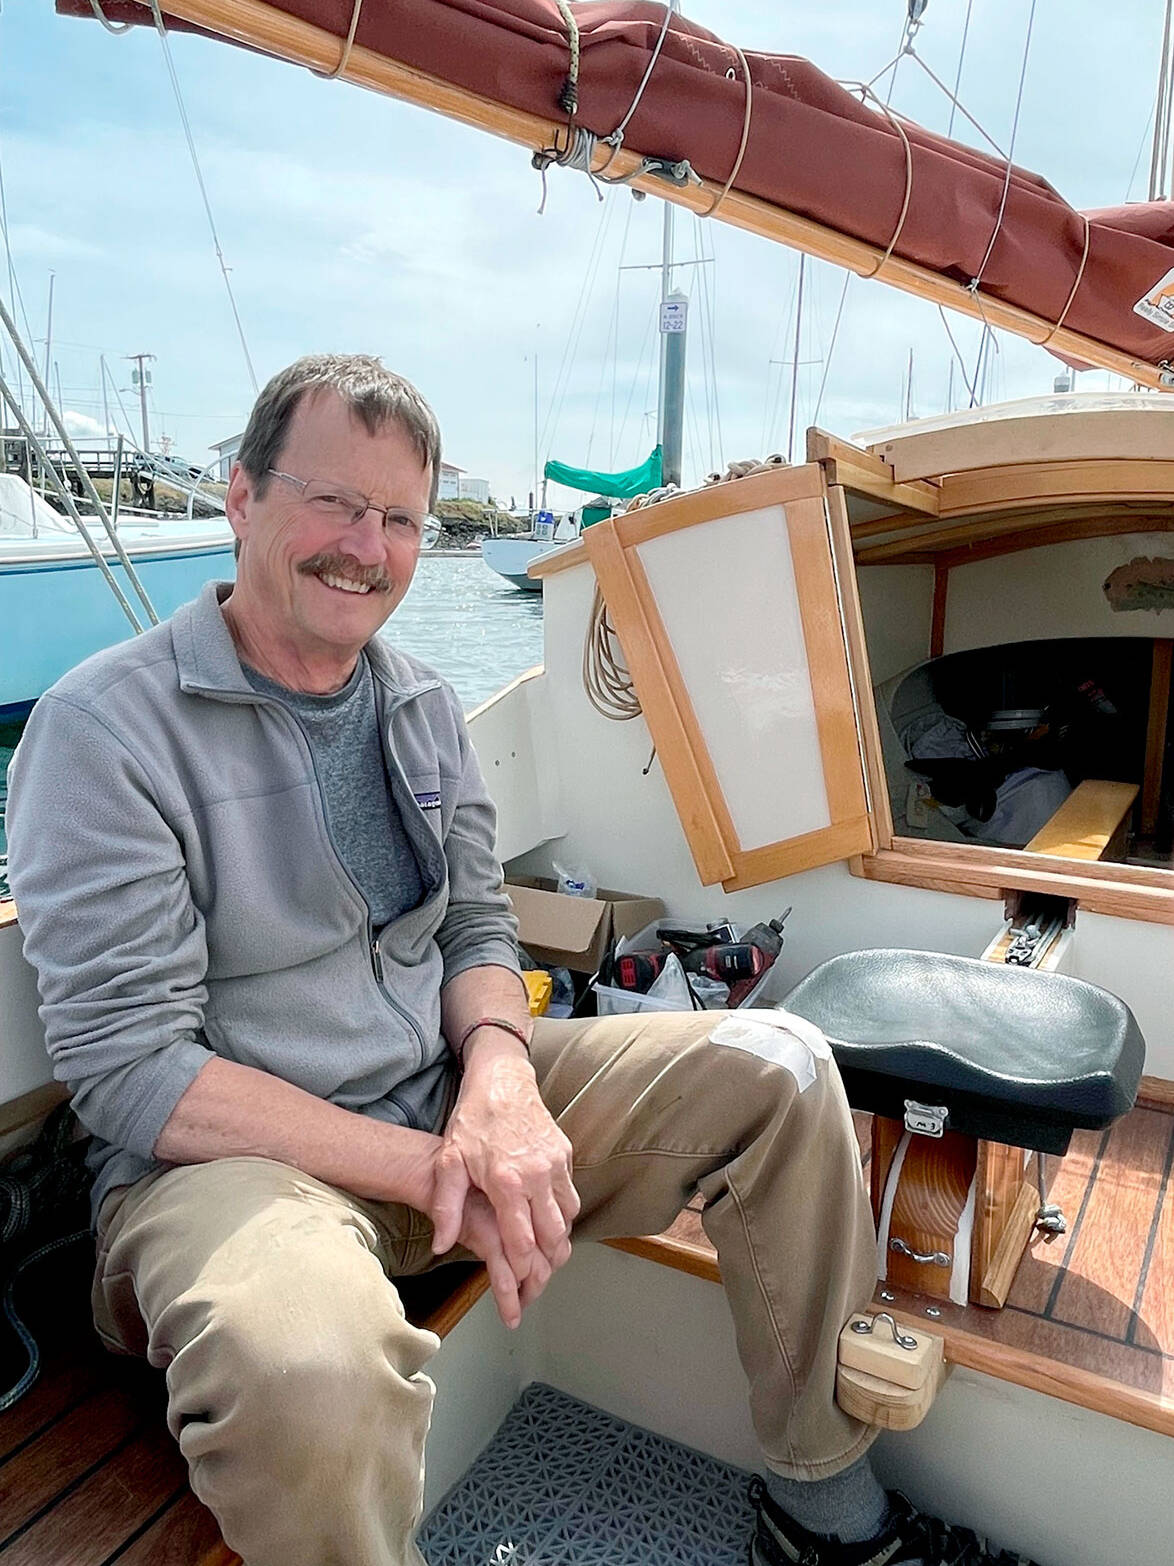 Doug Smith is a former school teacher from Talkeetna, Alaska, who built his 18-foot-long boat and named it “Dark Star” after the Grateful Dead song. He decided to enter the Race to Alaska after he lost his wife in 2019 and asked himself, “Now what do I do?” (Paula Hunt/Peninsula Daily News)